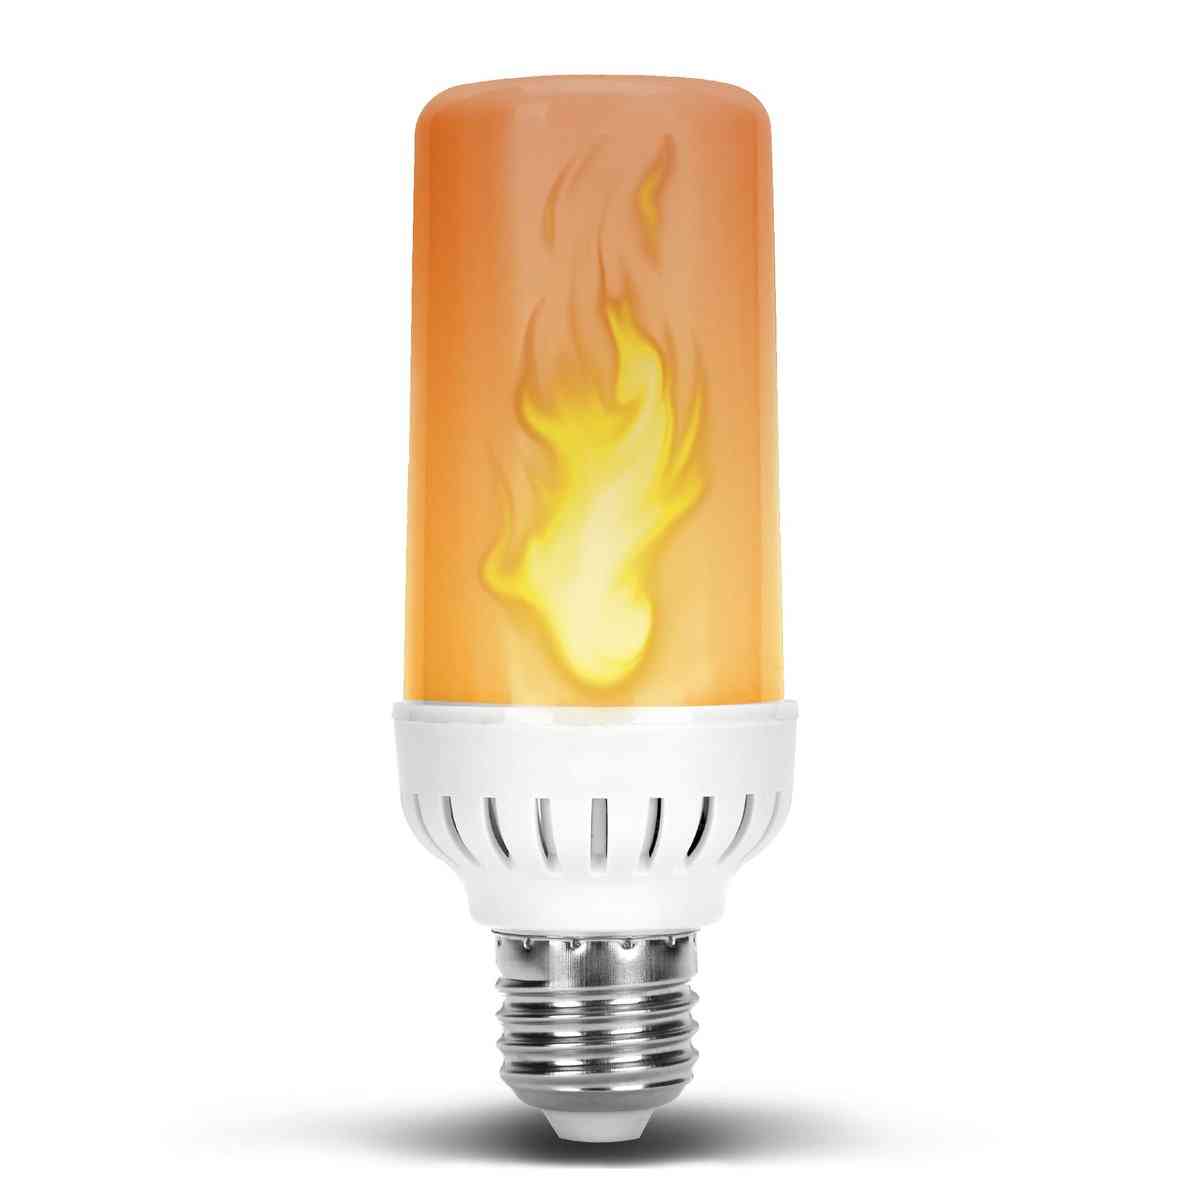 Led Artificial Flickering Flame Effect Fire Light Bulbs